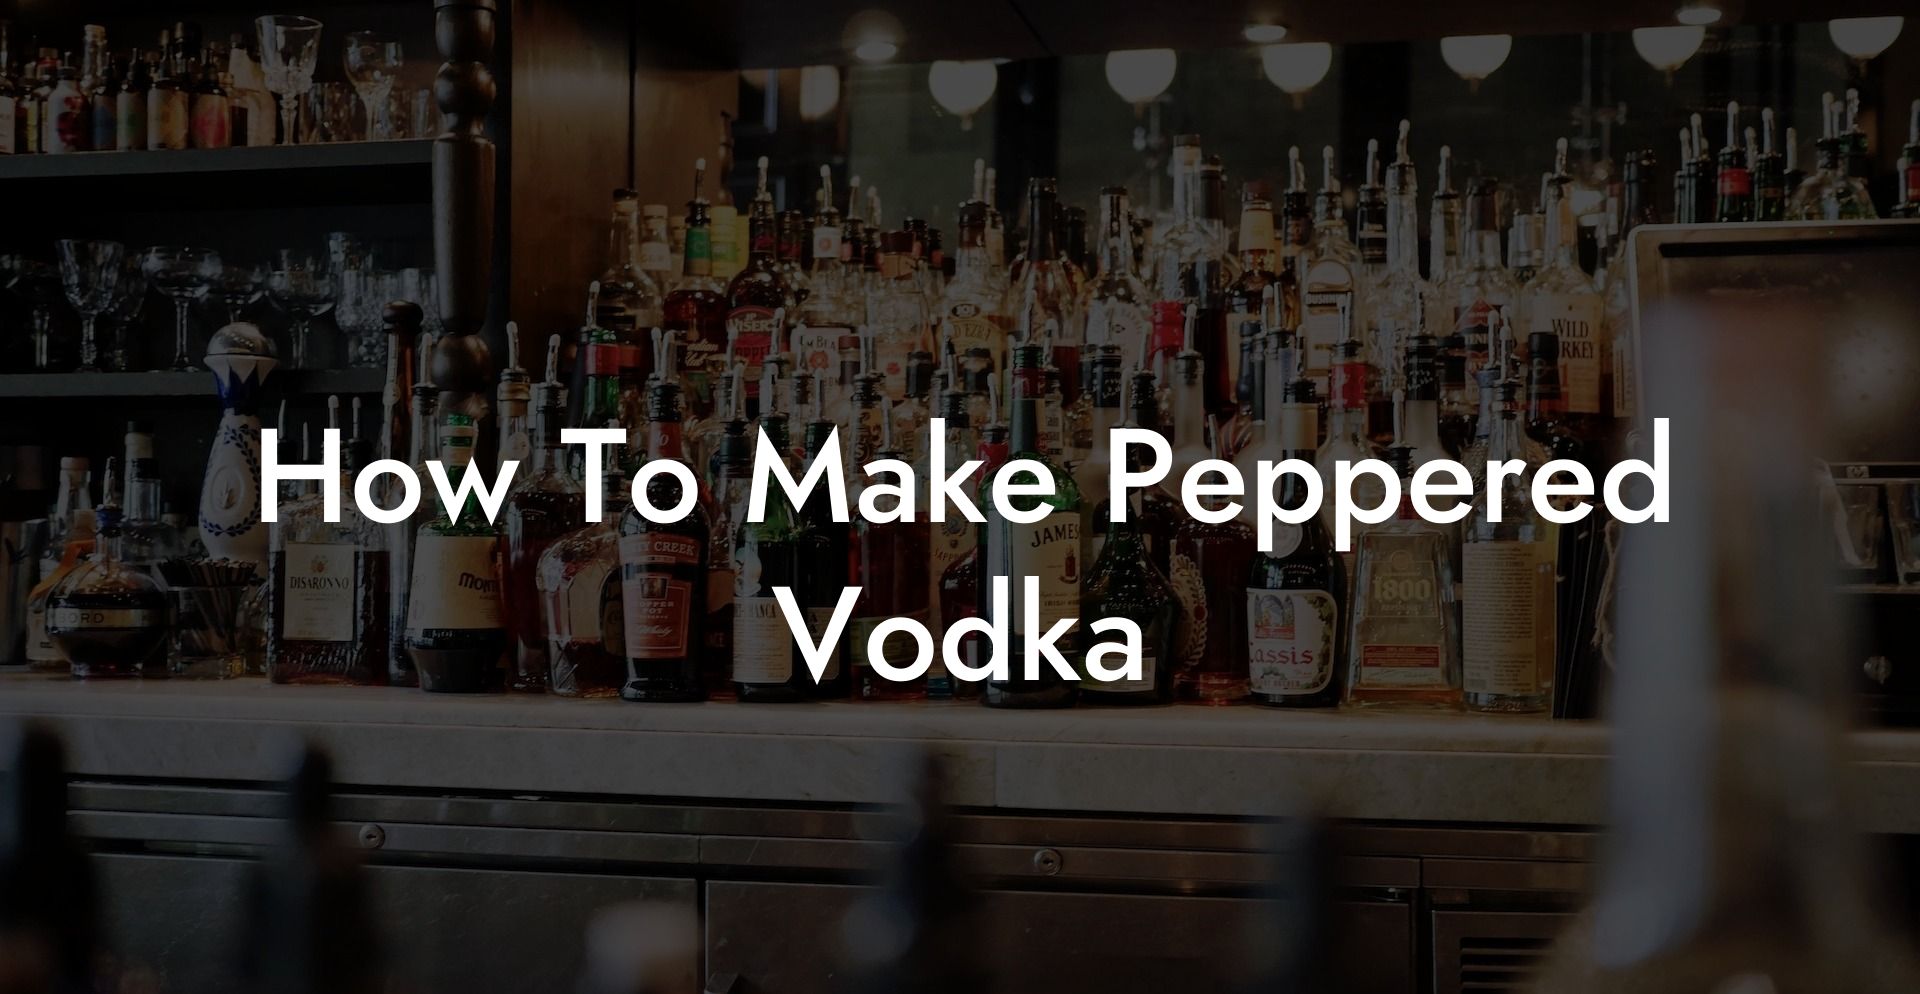 How To Make Peppered Vodka